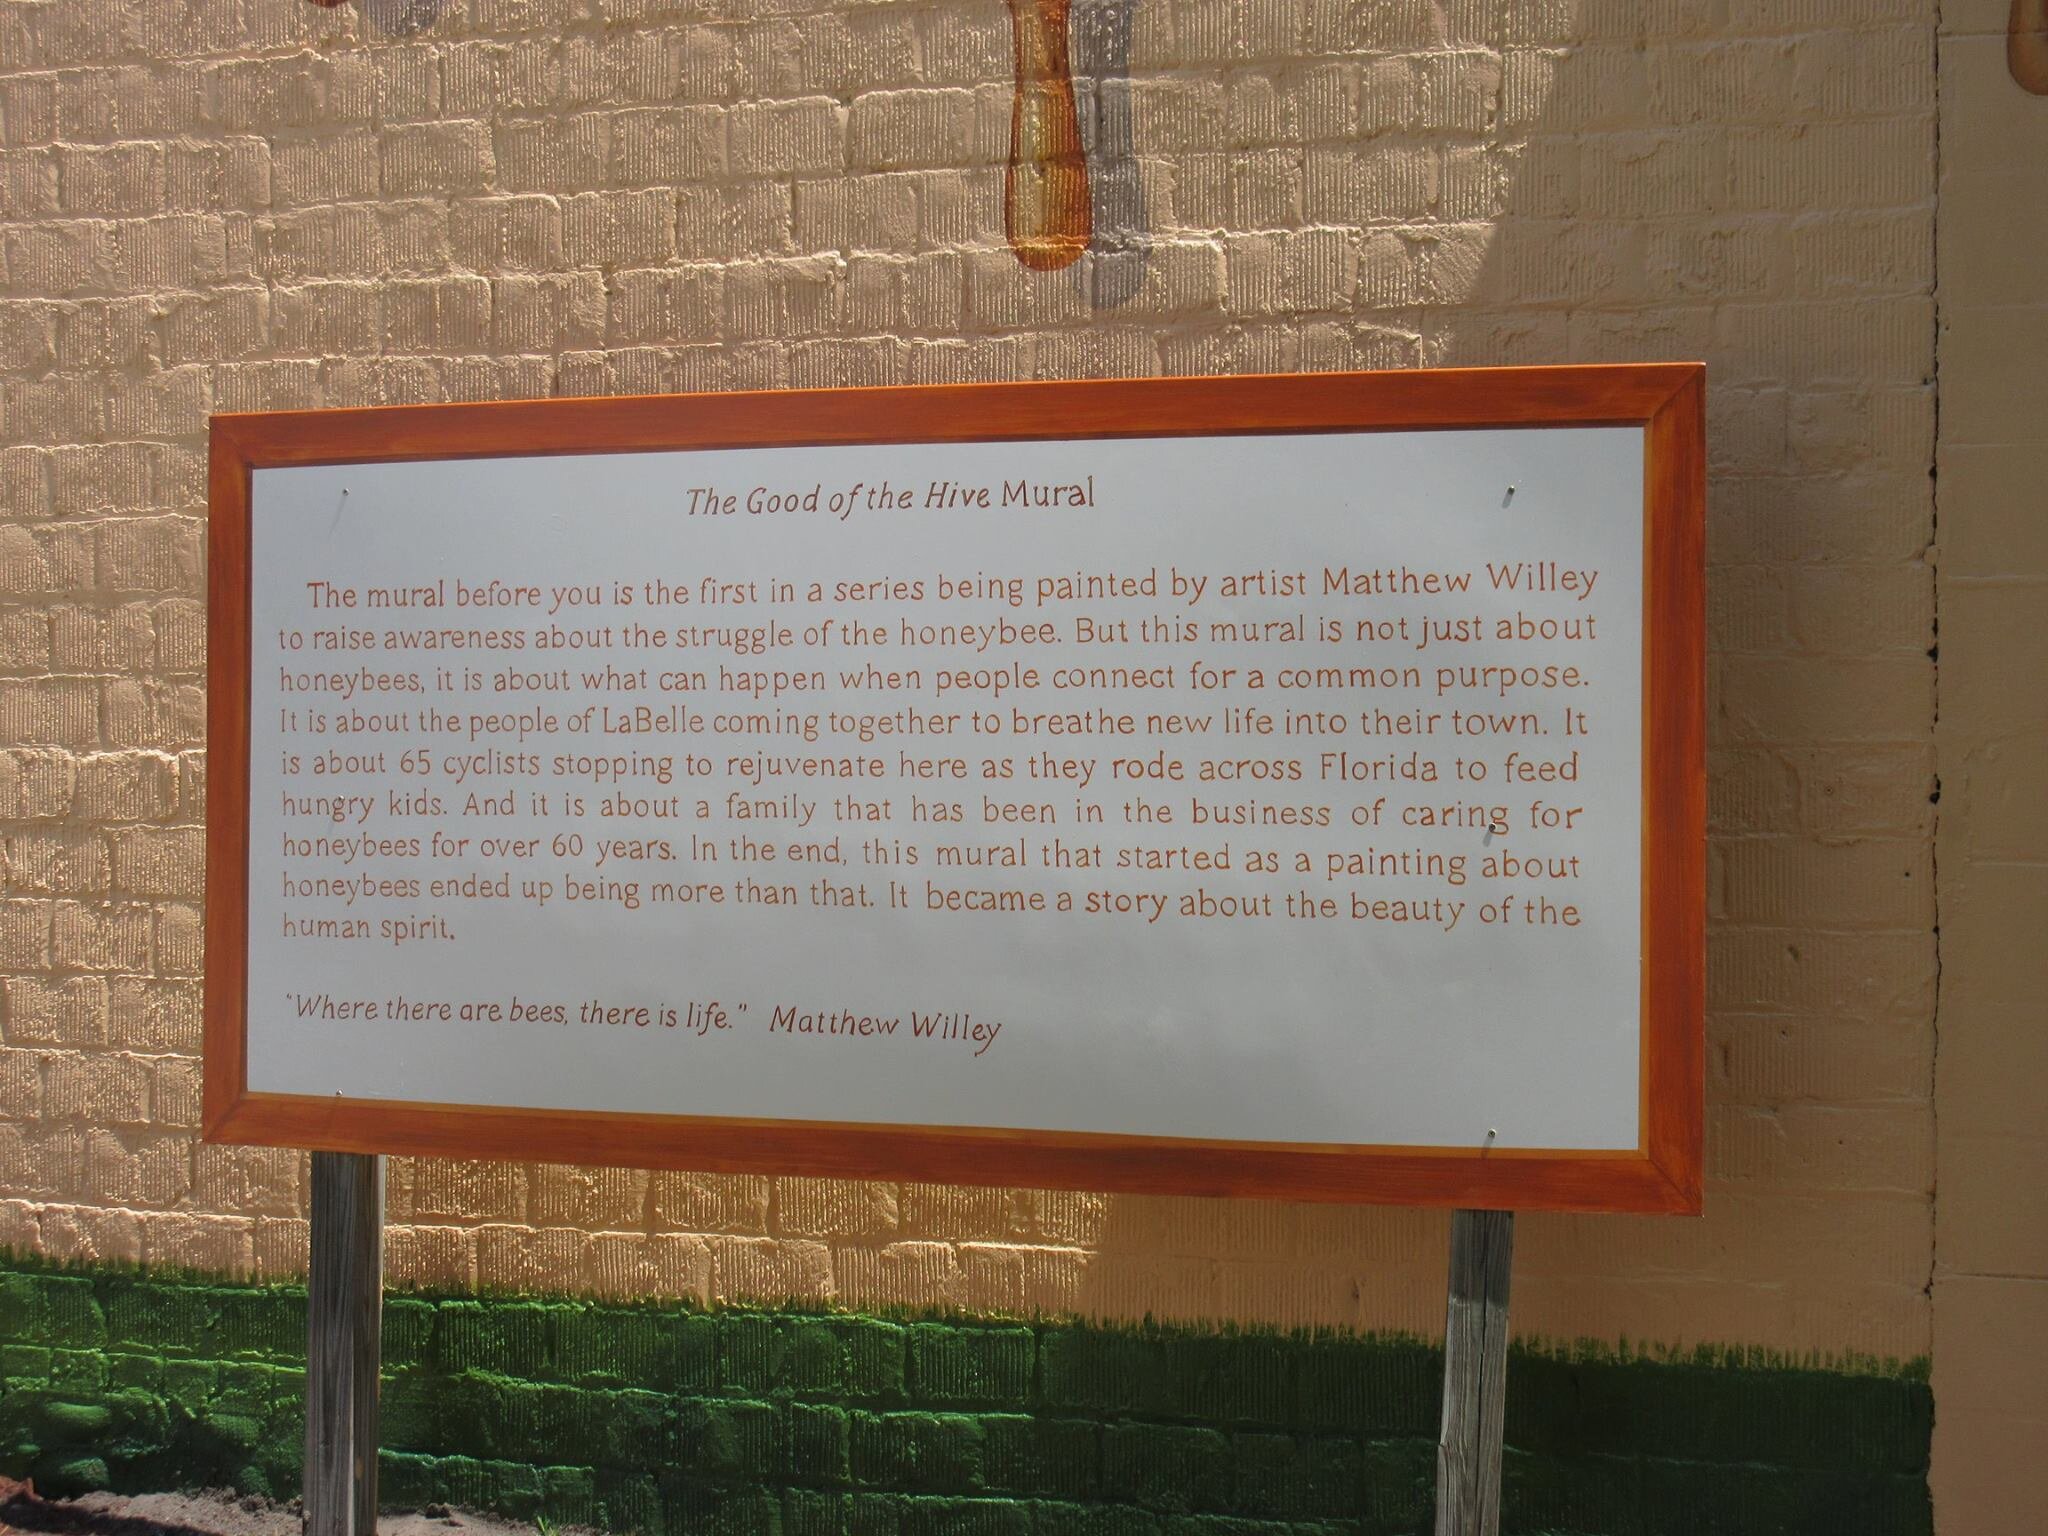 Sign describing the history and artistic nature of the mural